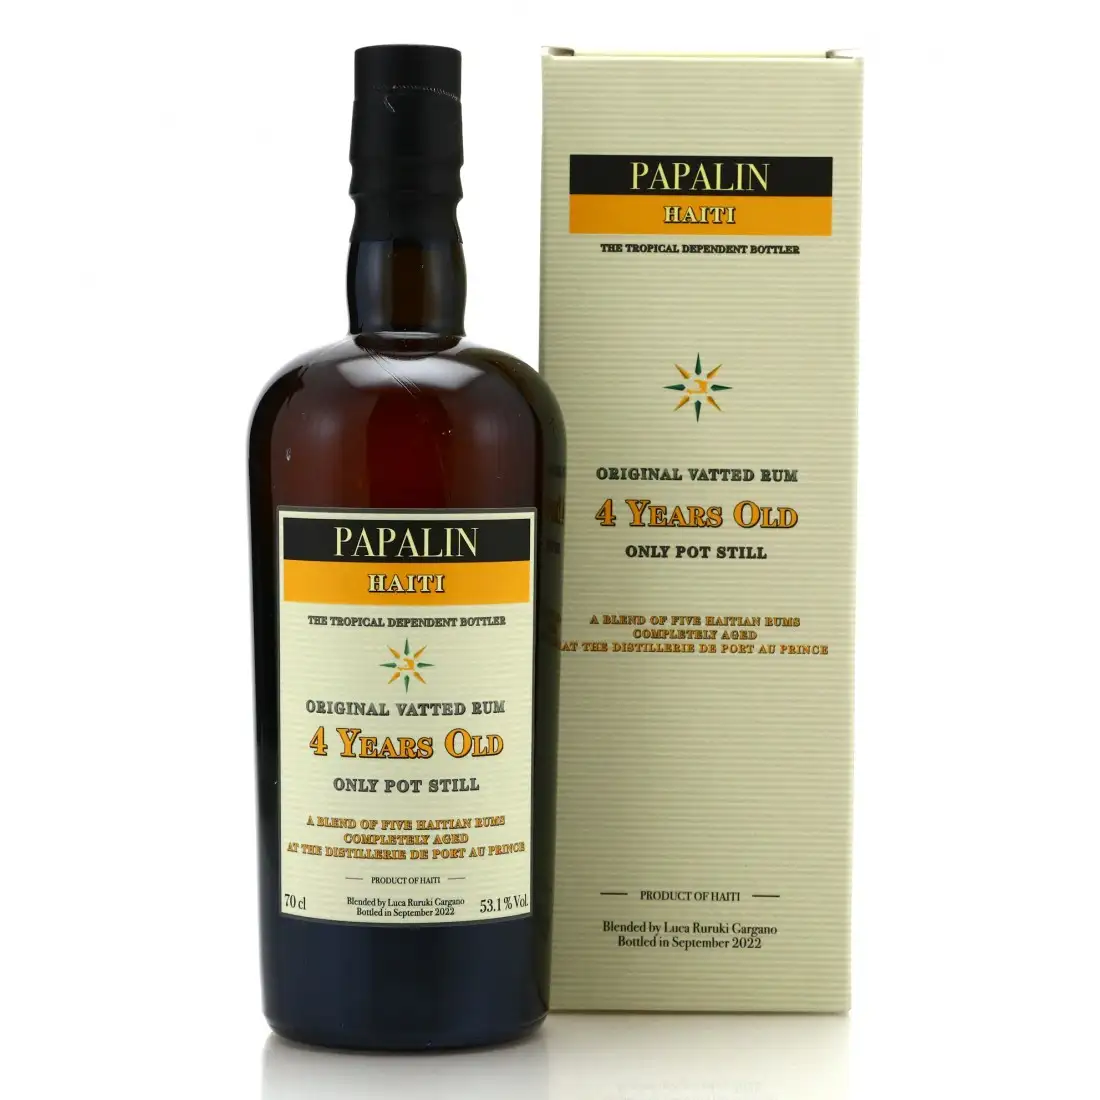 Image of the front of the bottle of the rum Papalin Haiti